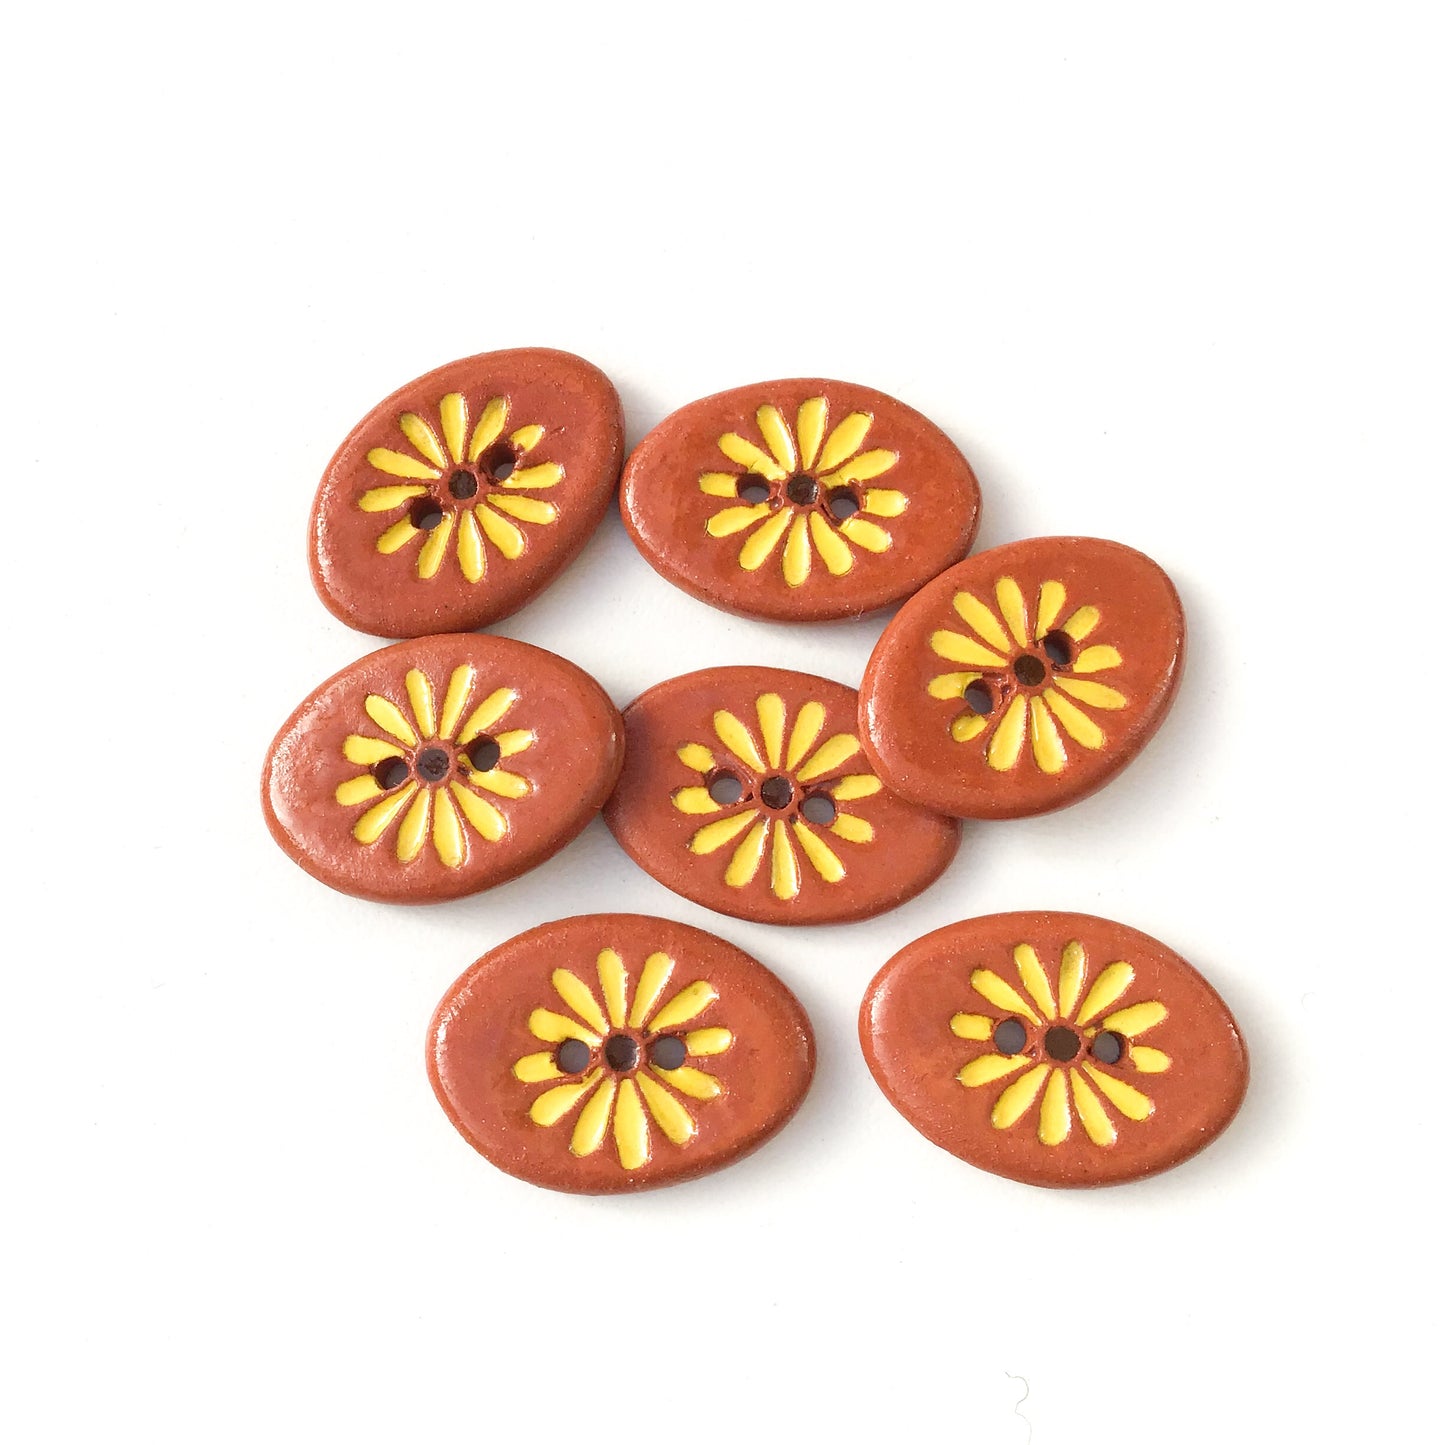 Yellow Daisy Button on Red Clay - Ceramic Flower Buttons - 5/8" x 7/8" - 7 Pack (ws-280)